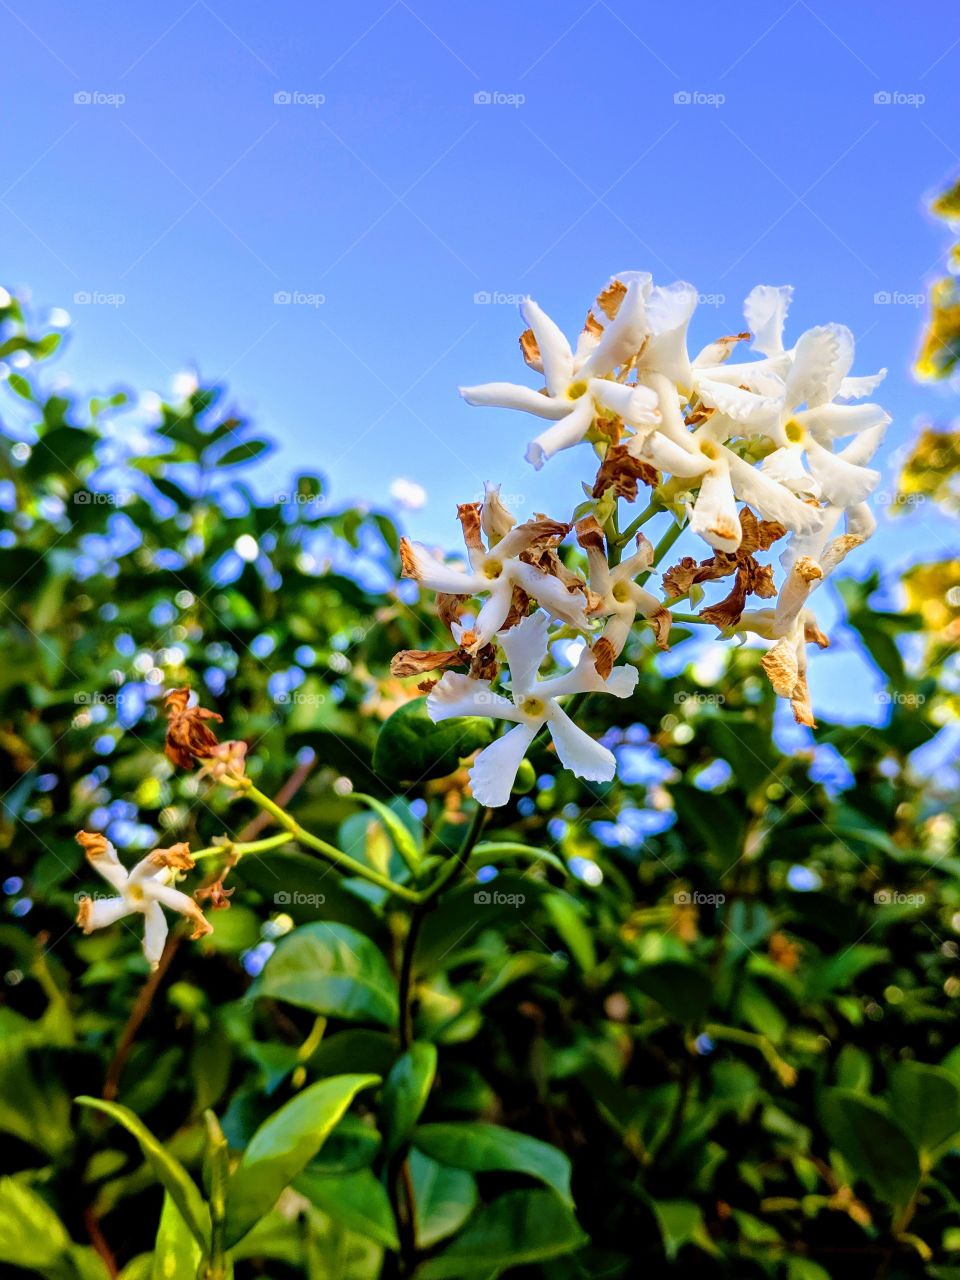 Dainty white flowers against a bright blue sky